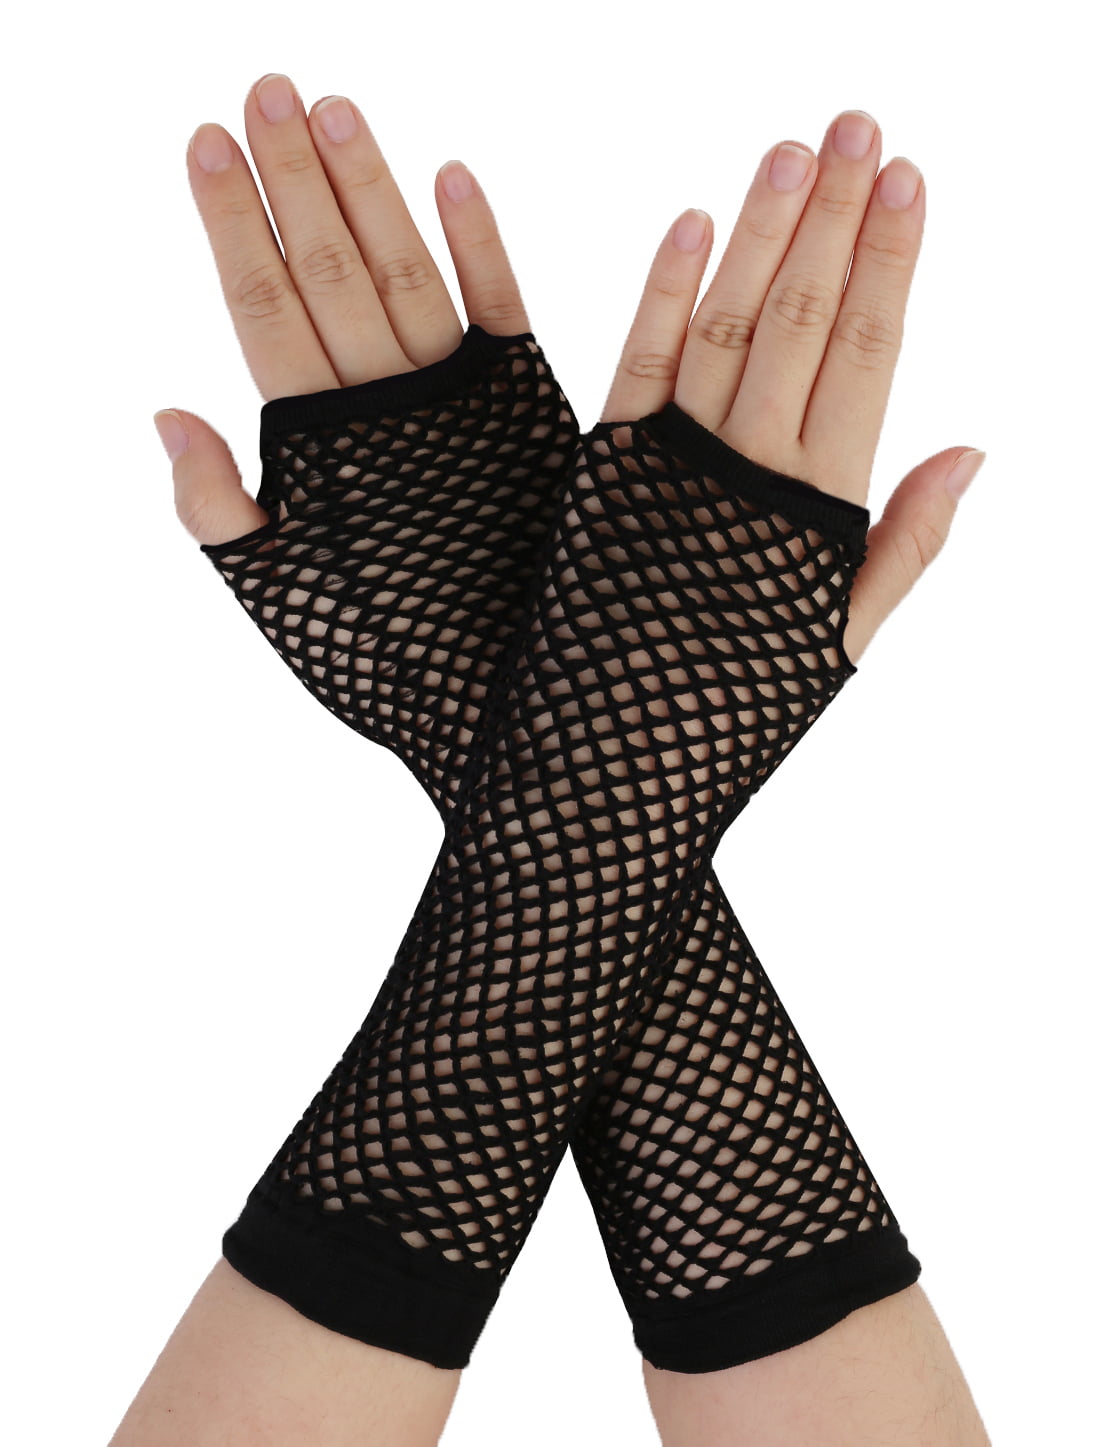 2 PAIRS MENS FINGERLESS GLOVES WITH SPANDEX FOR COMFORT 